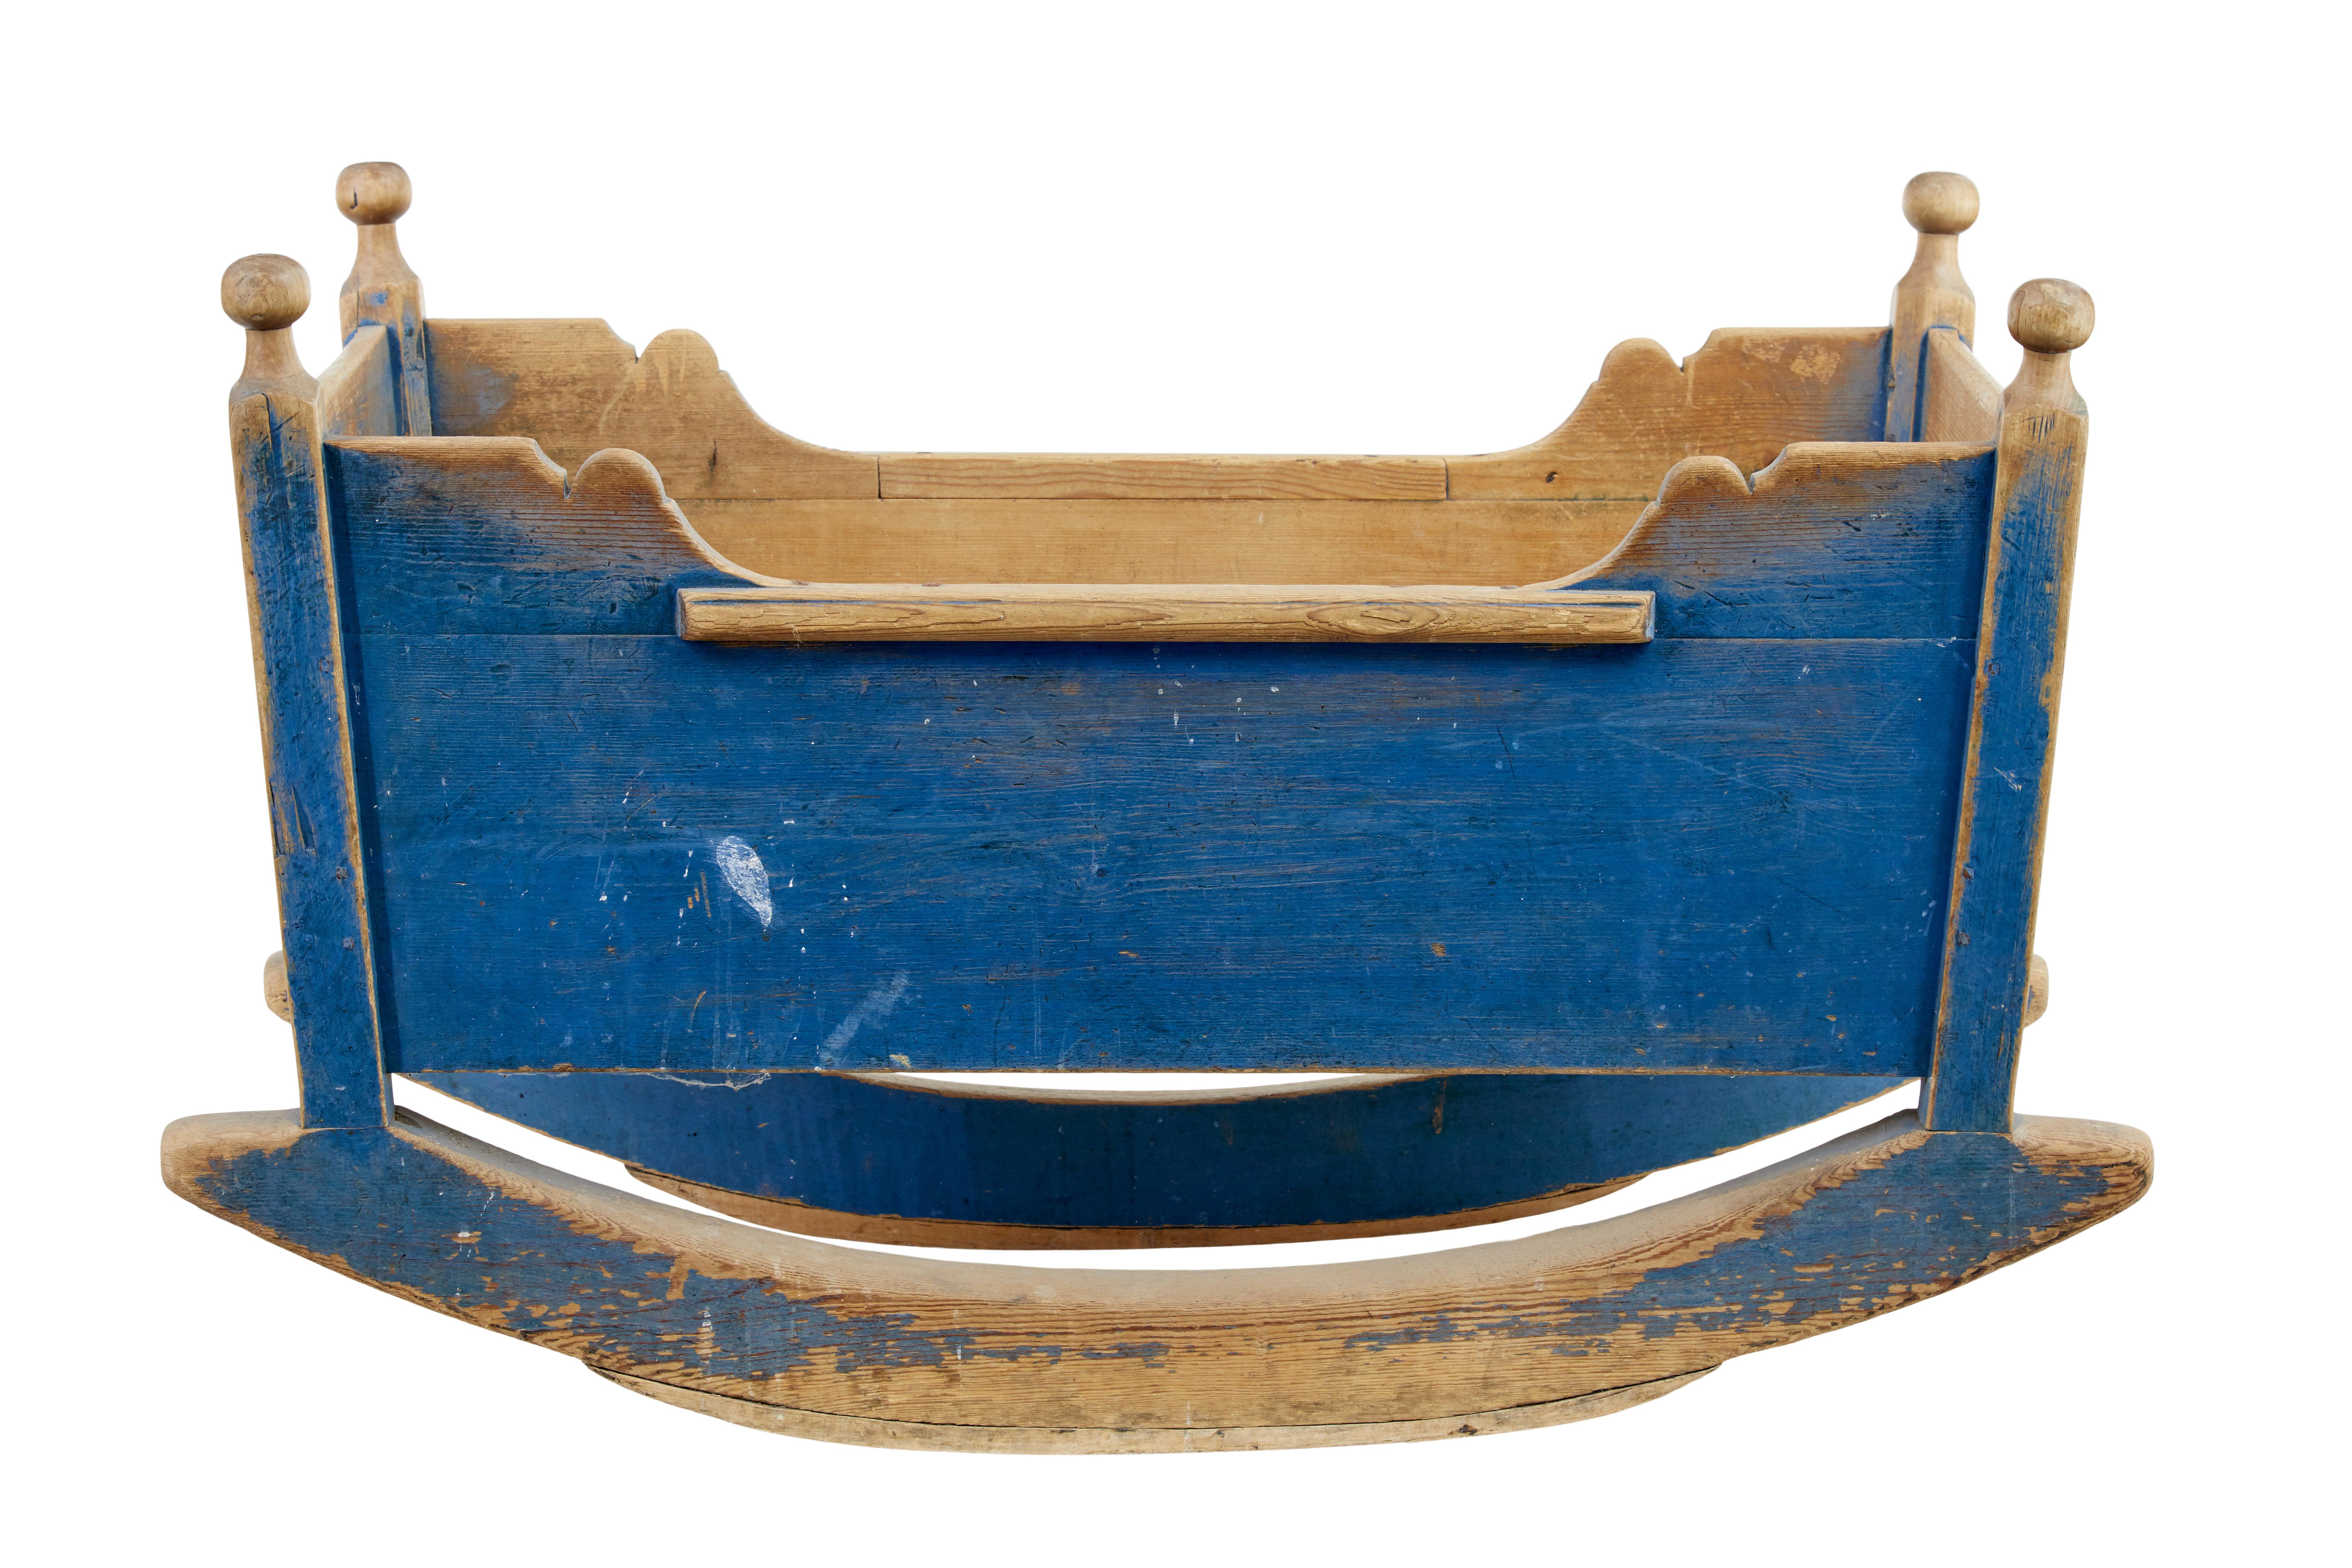 Original condition traditional Swedish rocking cradle circa 1860.

Painted in traditional blue colours with personalised inscribed with 2 births with initials from 1852 and 1855.   Rare piece painted in original colours, turned finials in pine.

A